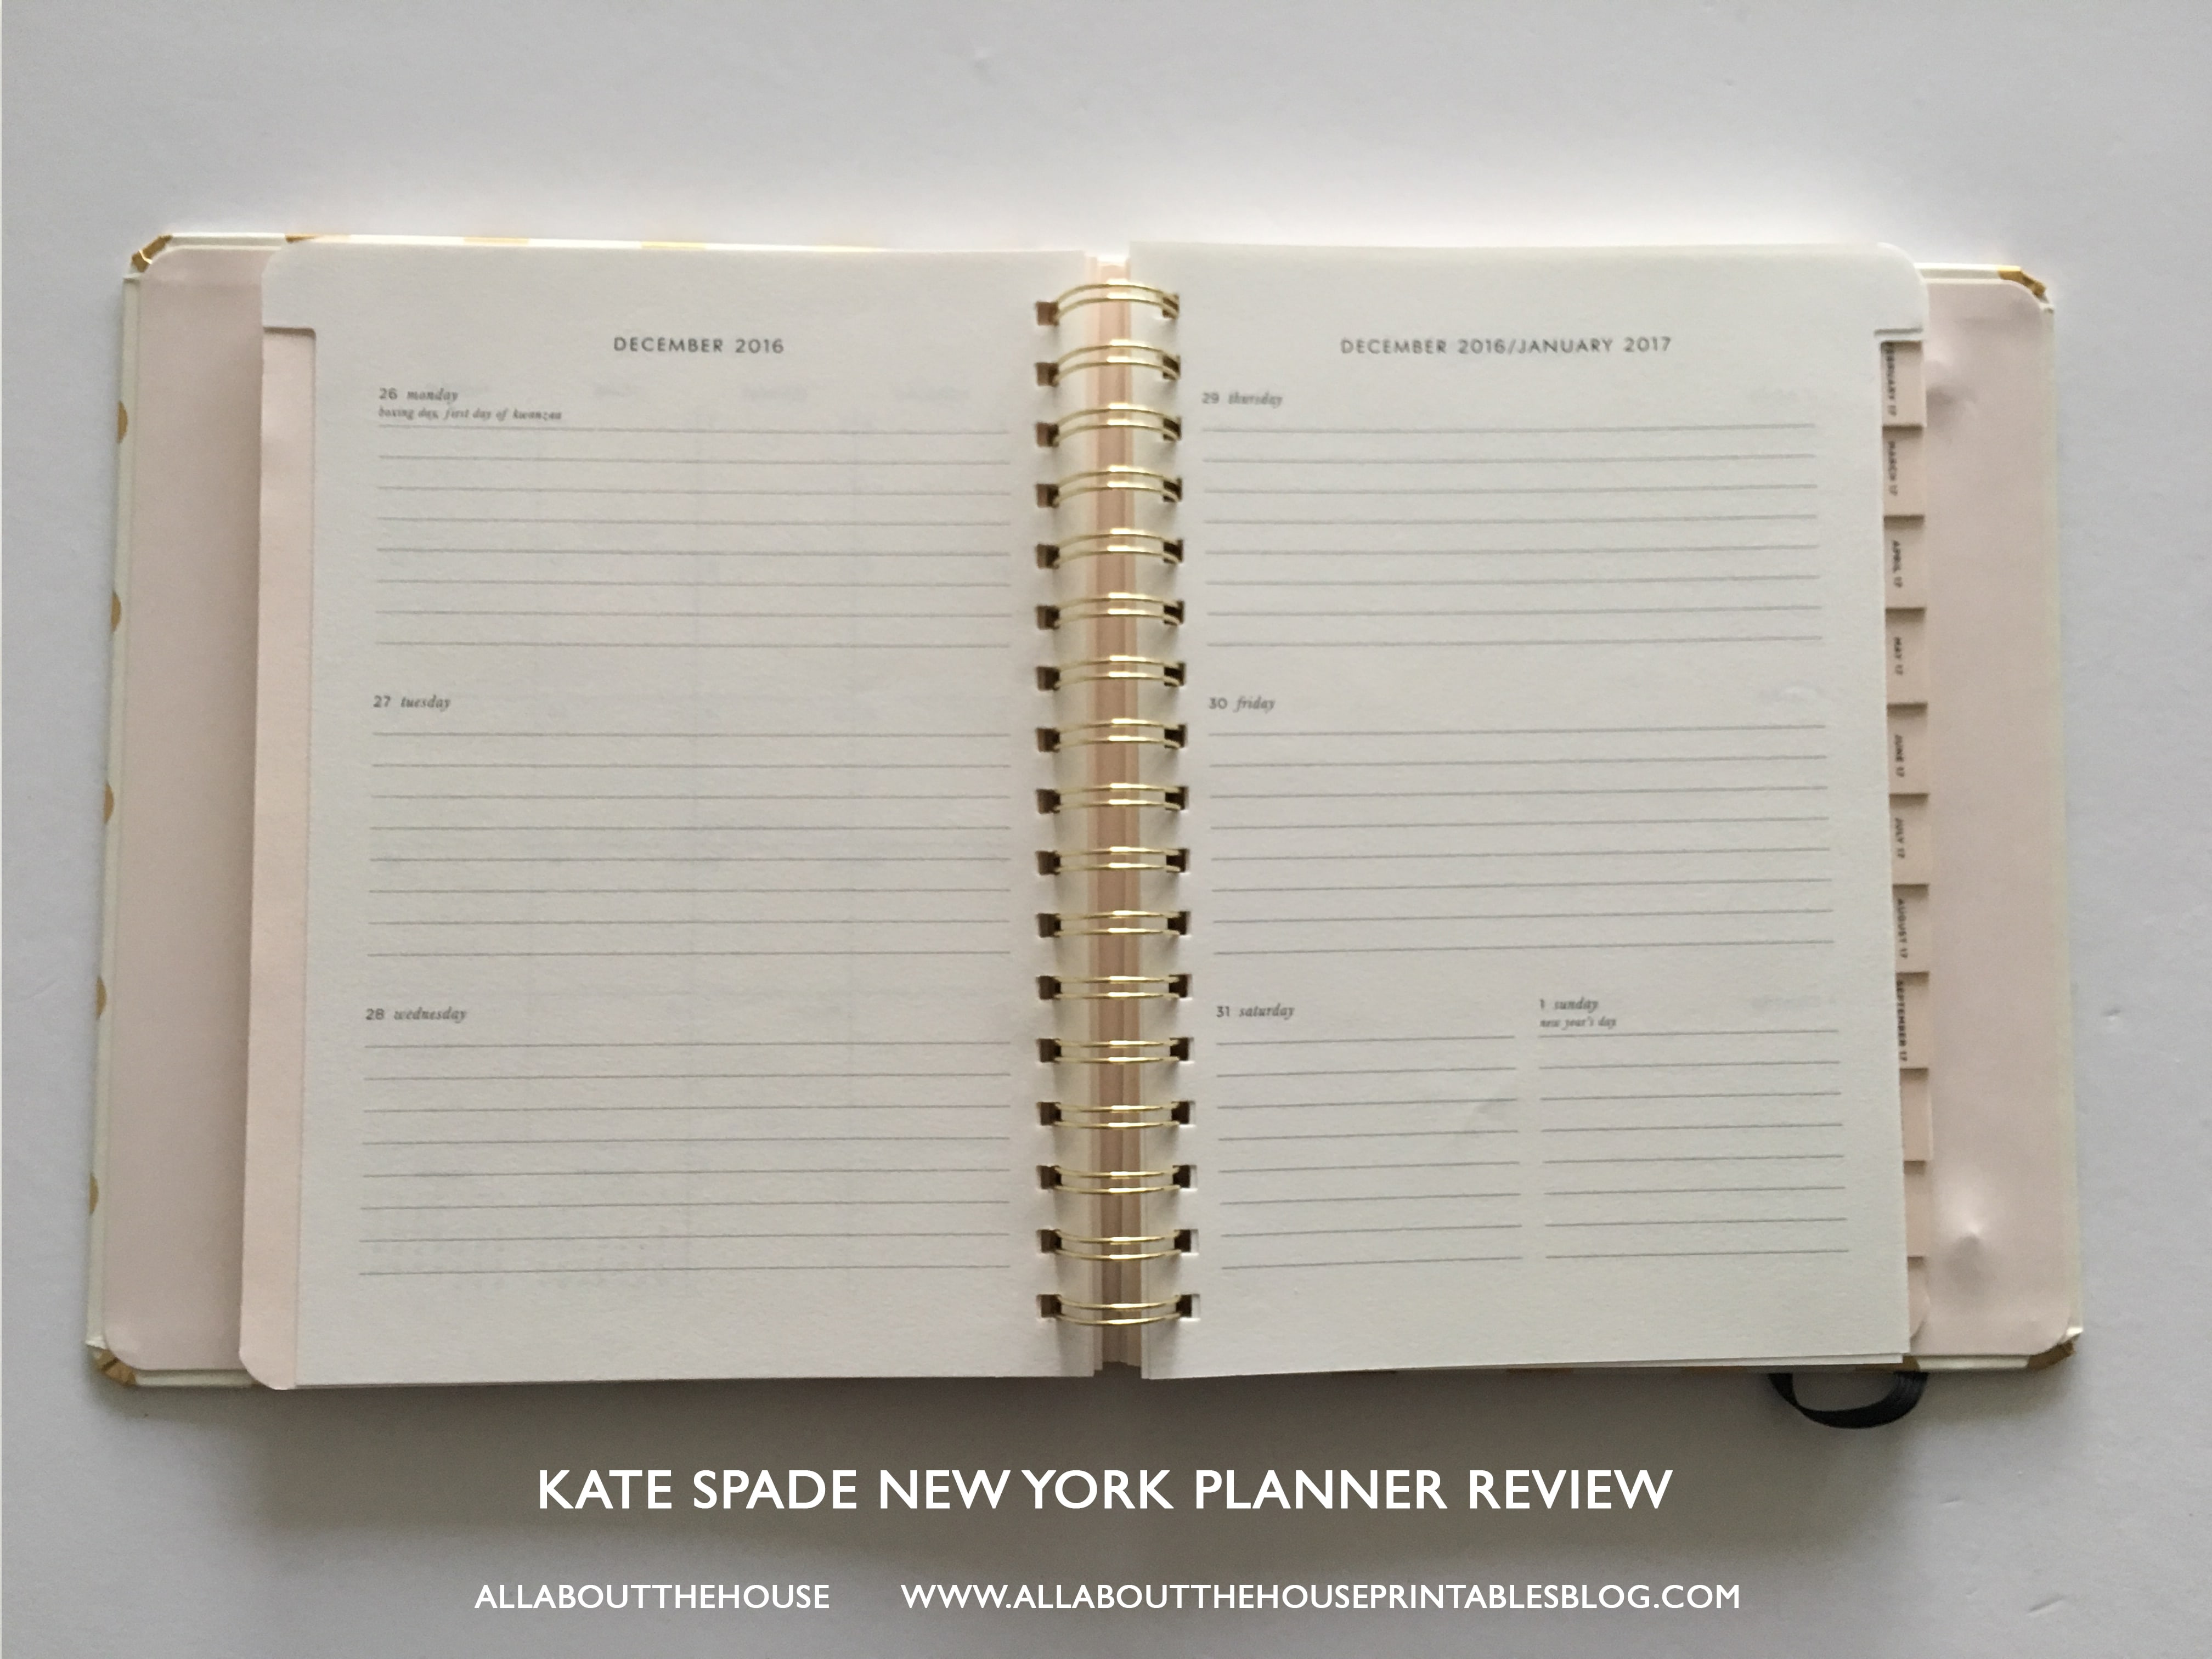 kate spade planner review best planner for 2017 agenda review a5 horizontal lines study school mom agenda organizer weekly-min